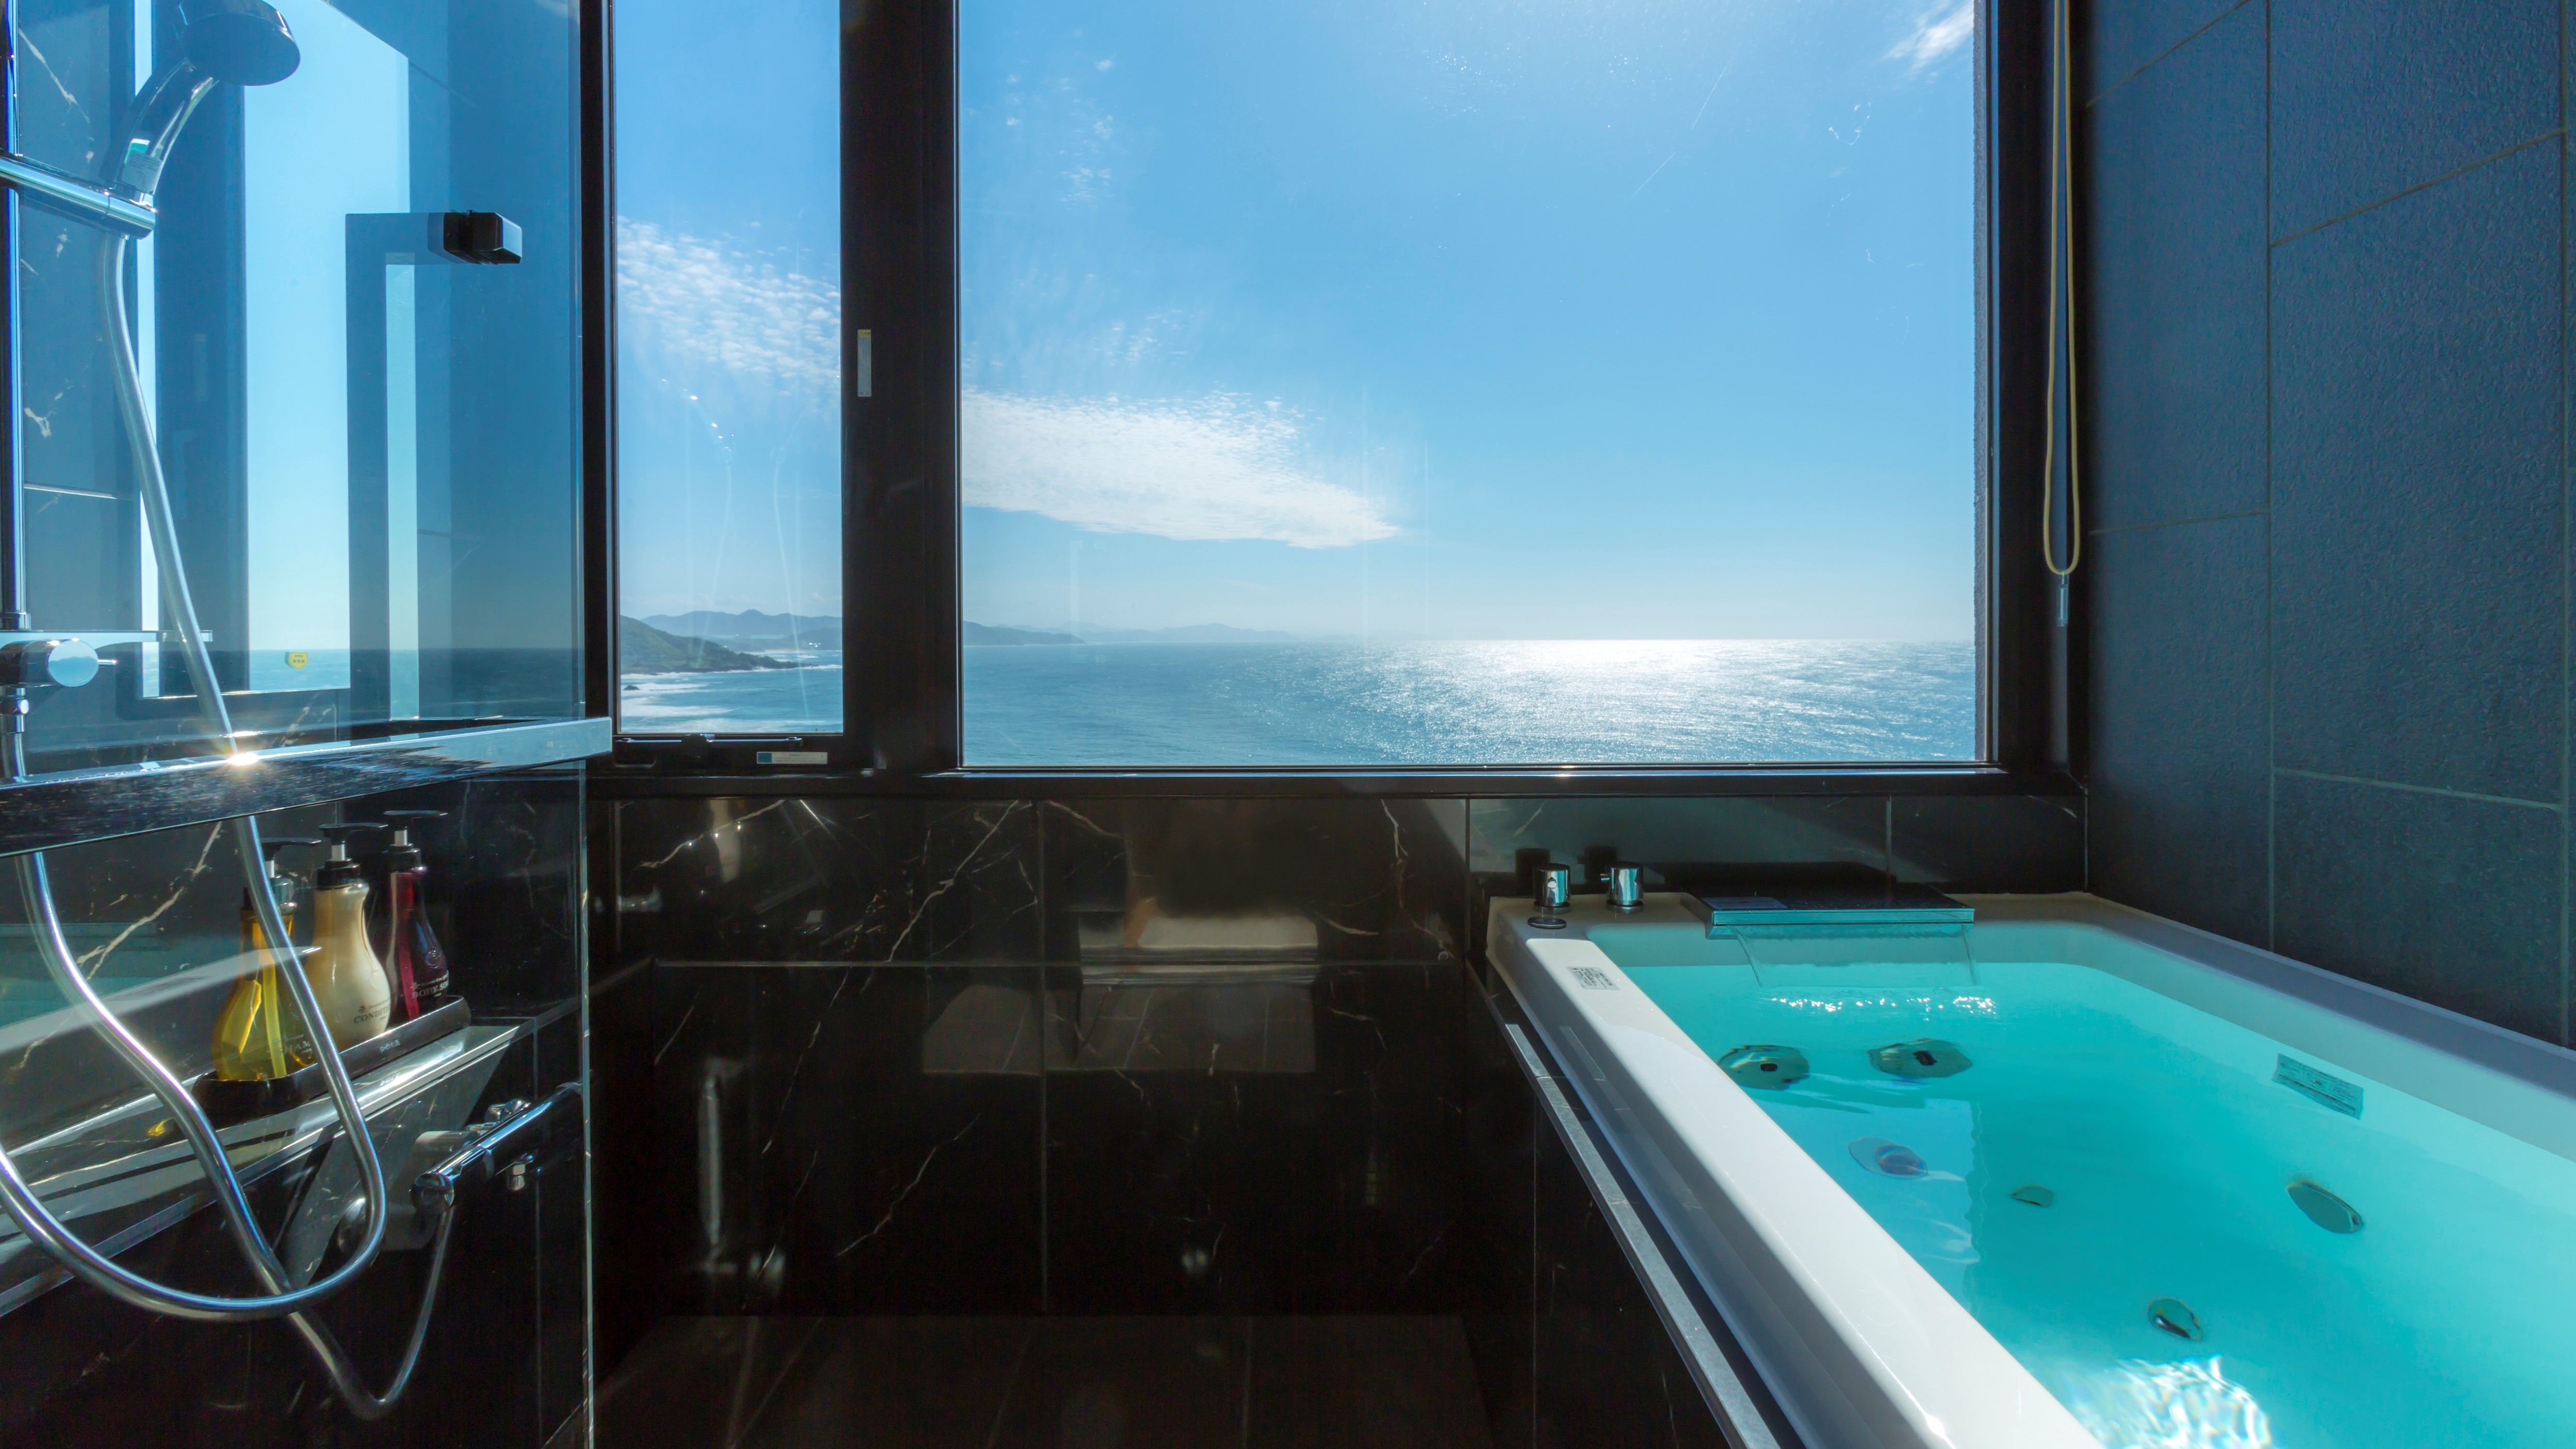 [Top floor special room "Tenkai"] You can overlook the beautiful sea from the guest room observation bath with ocean view.